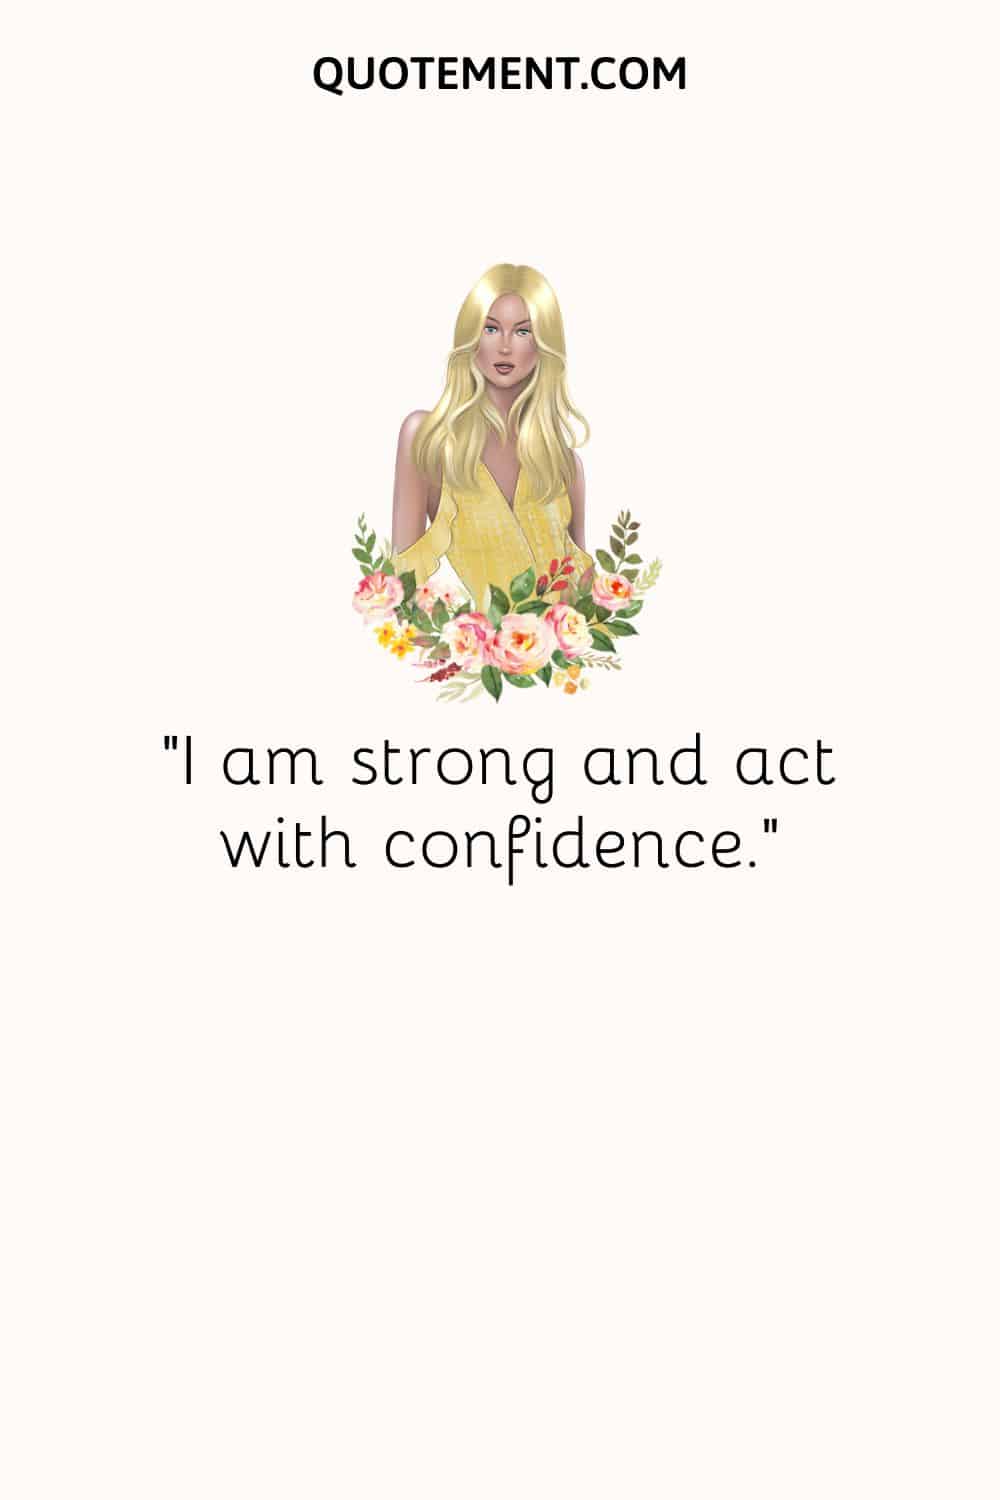 lady in yellow dress and flowers image representing positive affirmation for self esteem